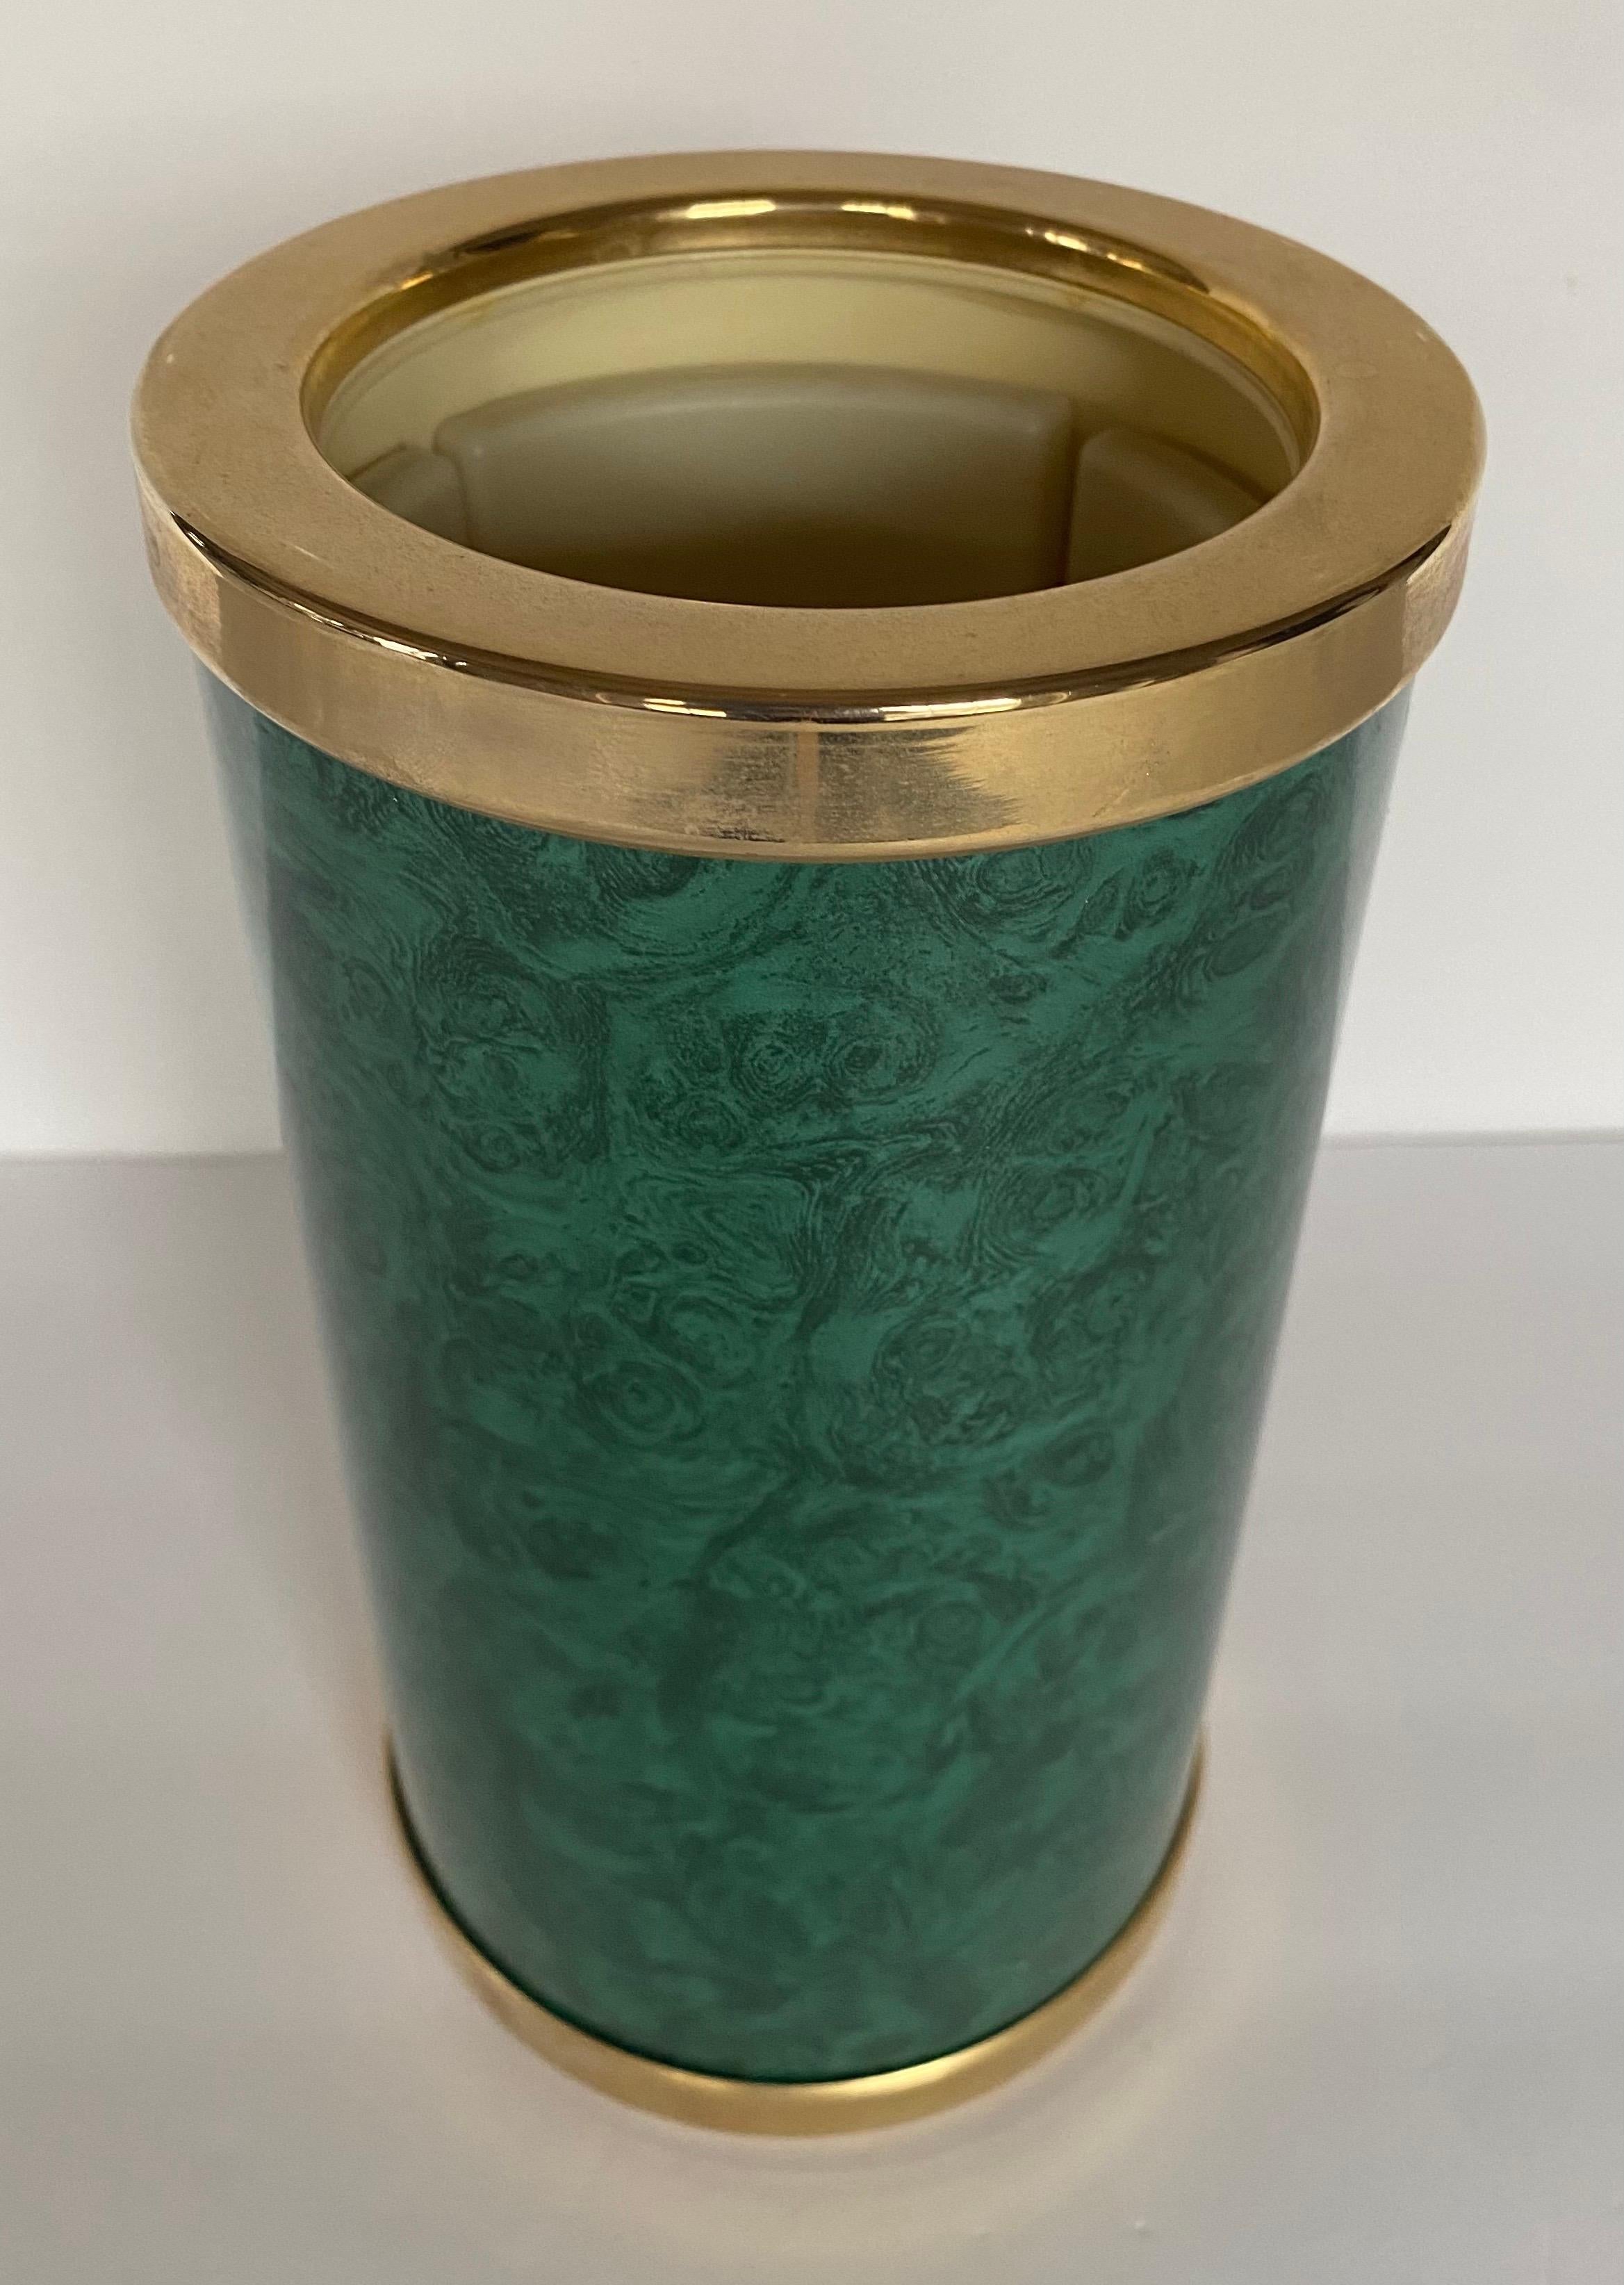 Midcentury faux malachite wine or champagne bottle chiller featuring a faux malachite design with gold trim detailing. Four interior panels hold water and can be frozen for chilling. Made in France.